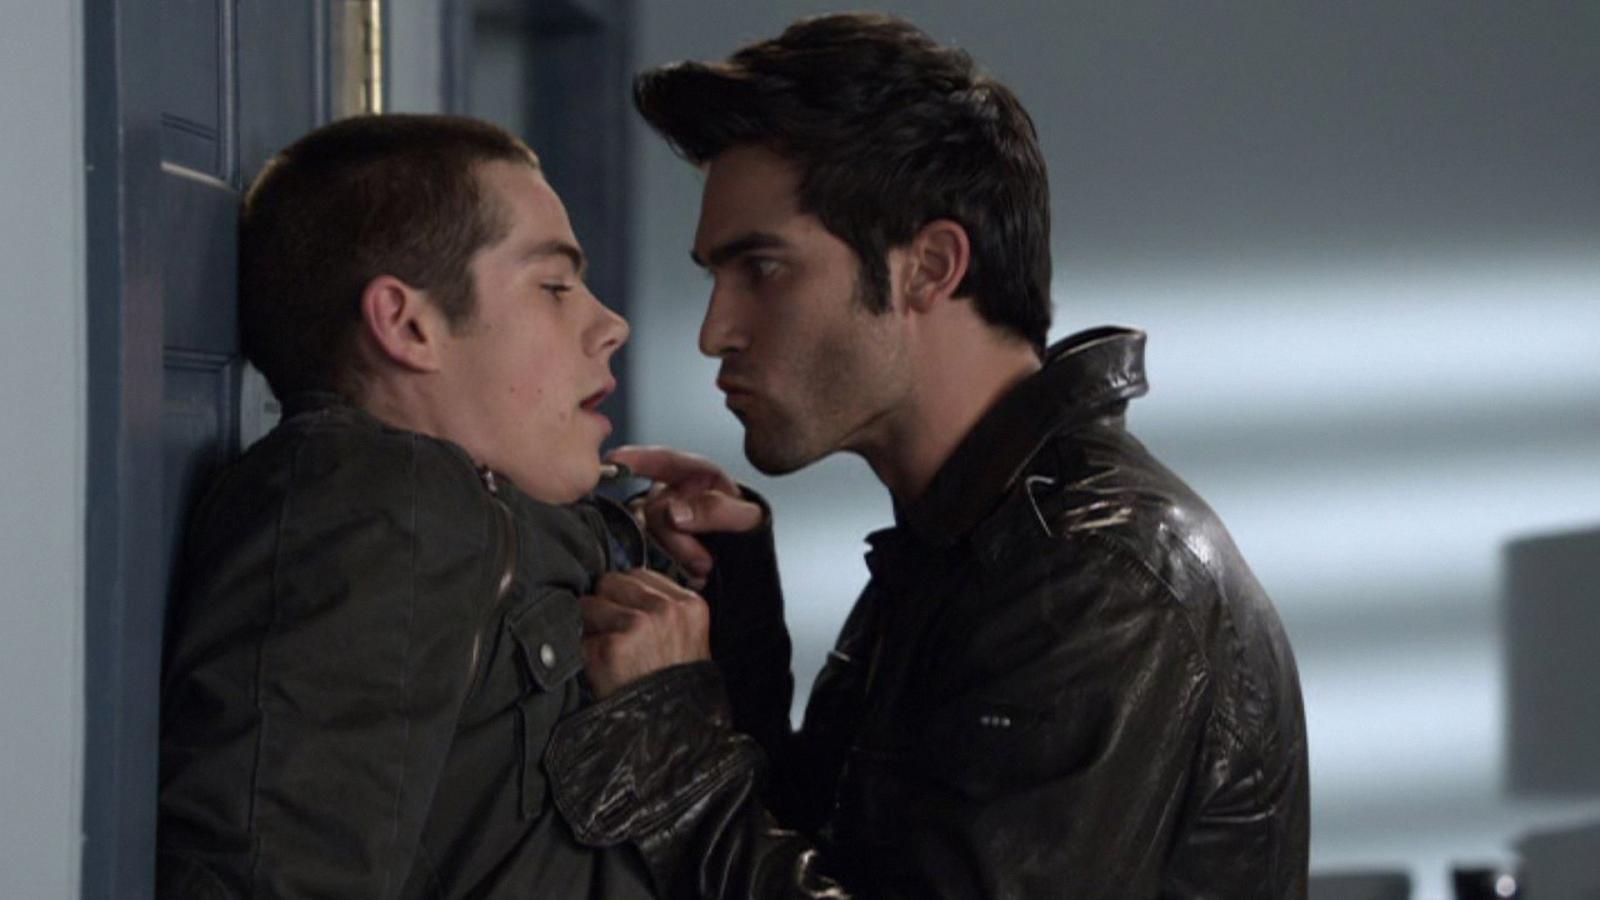 Took the Bait! 5 TV Shows That Lured Viewers with Homoerotic Tropes - image 2